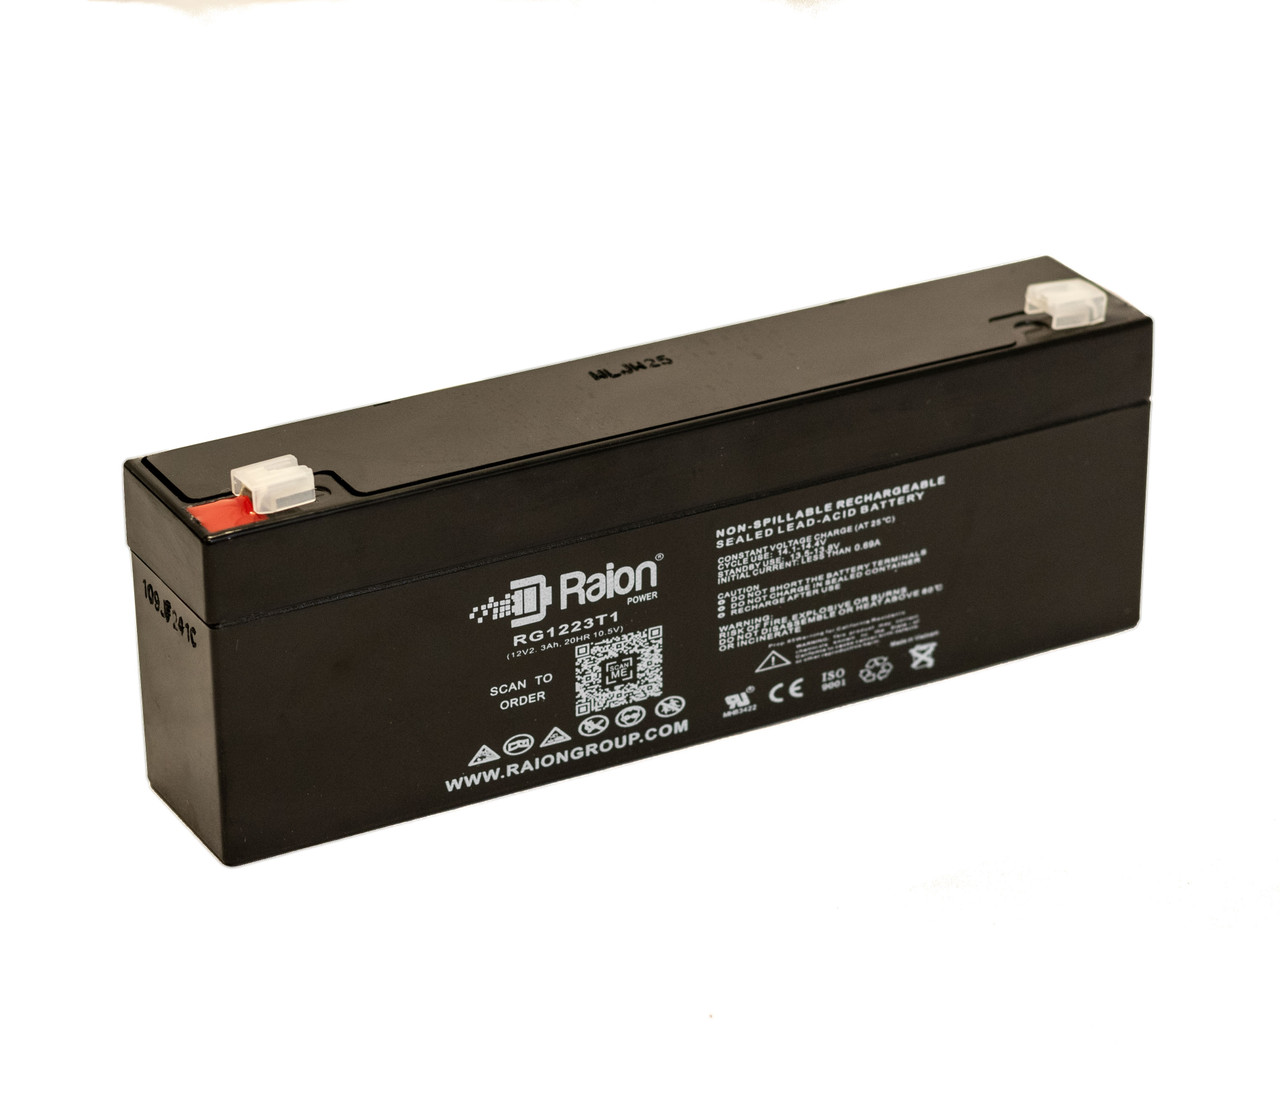 Raion Power RG1223T1 Replacement Battery for Tenzcare Guardian Infusion